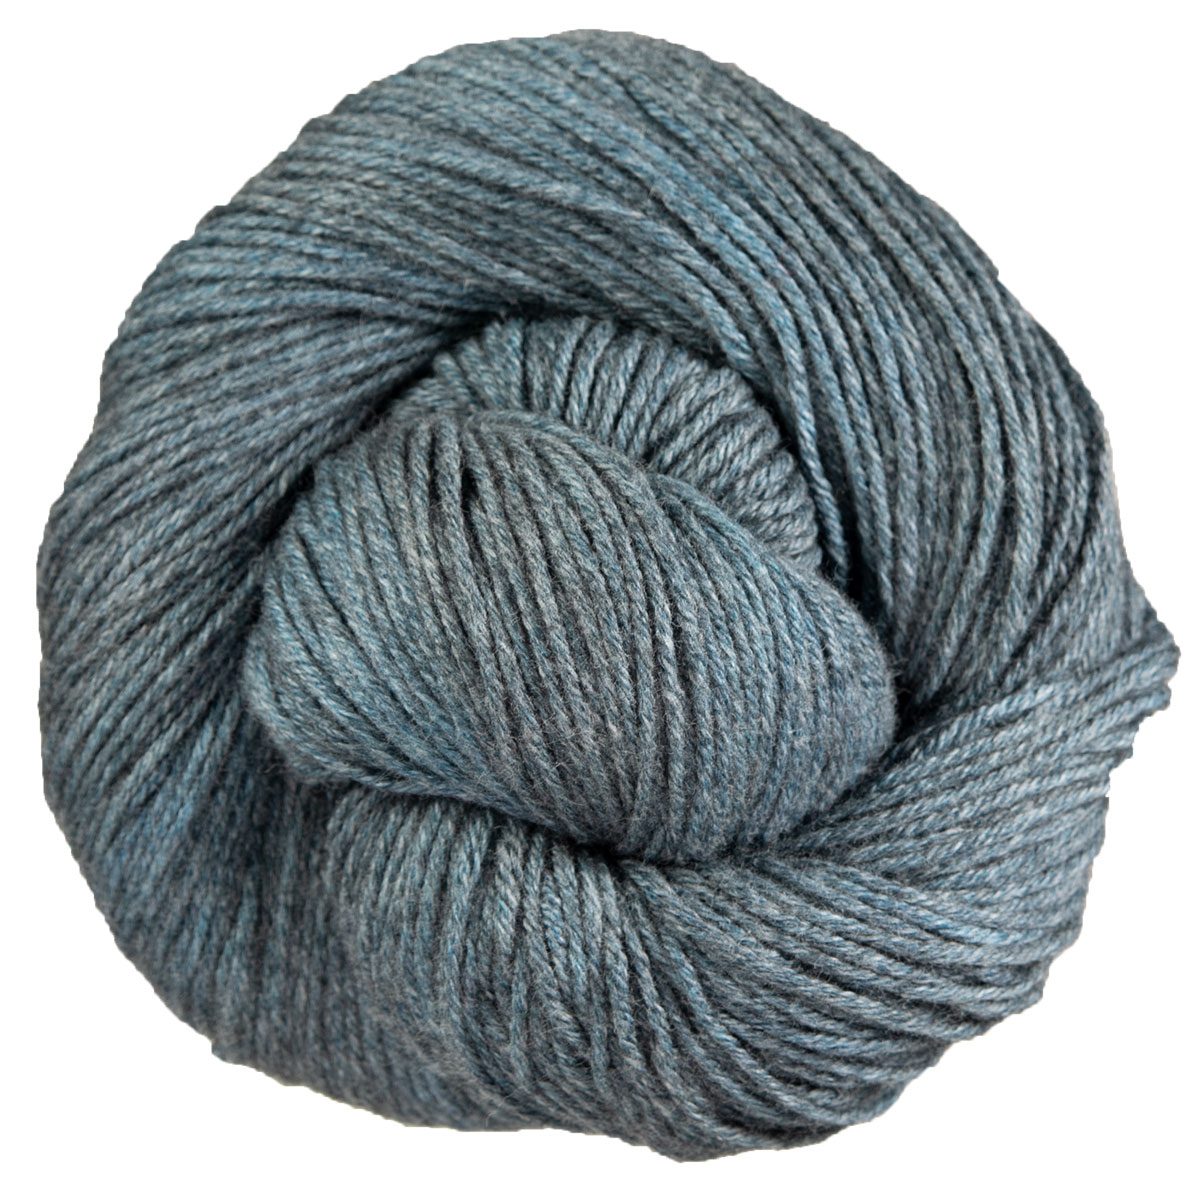 Madelinetosh Wool + Cotton Yarn - The Websters